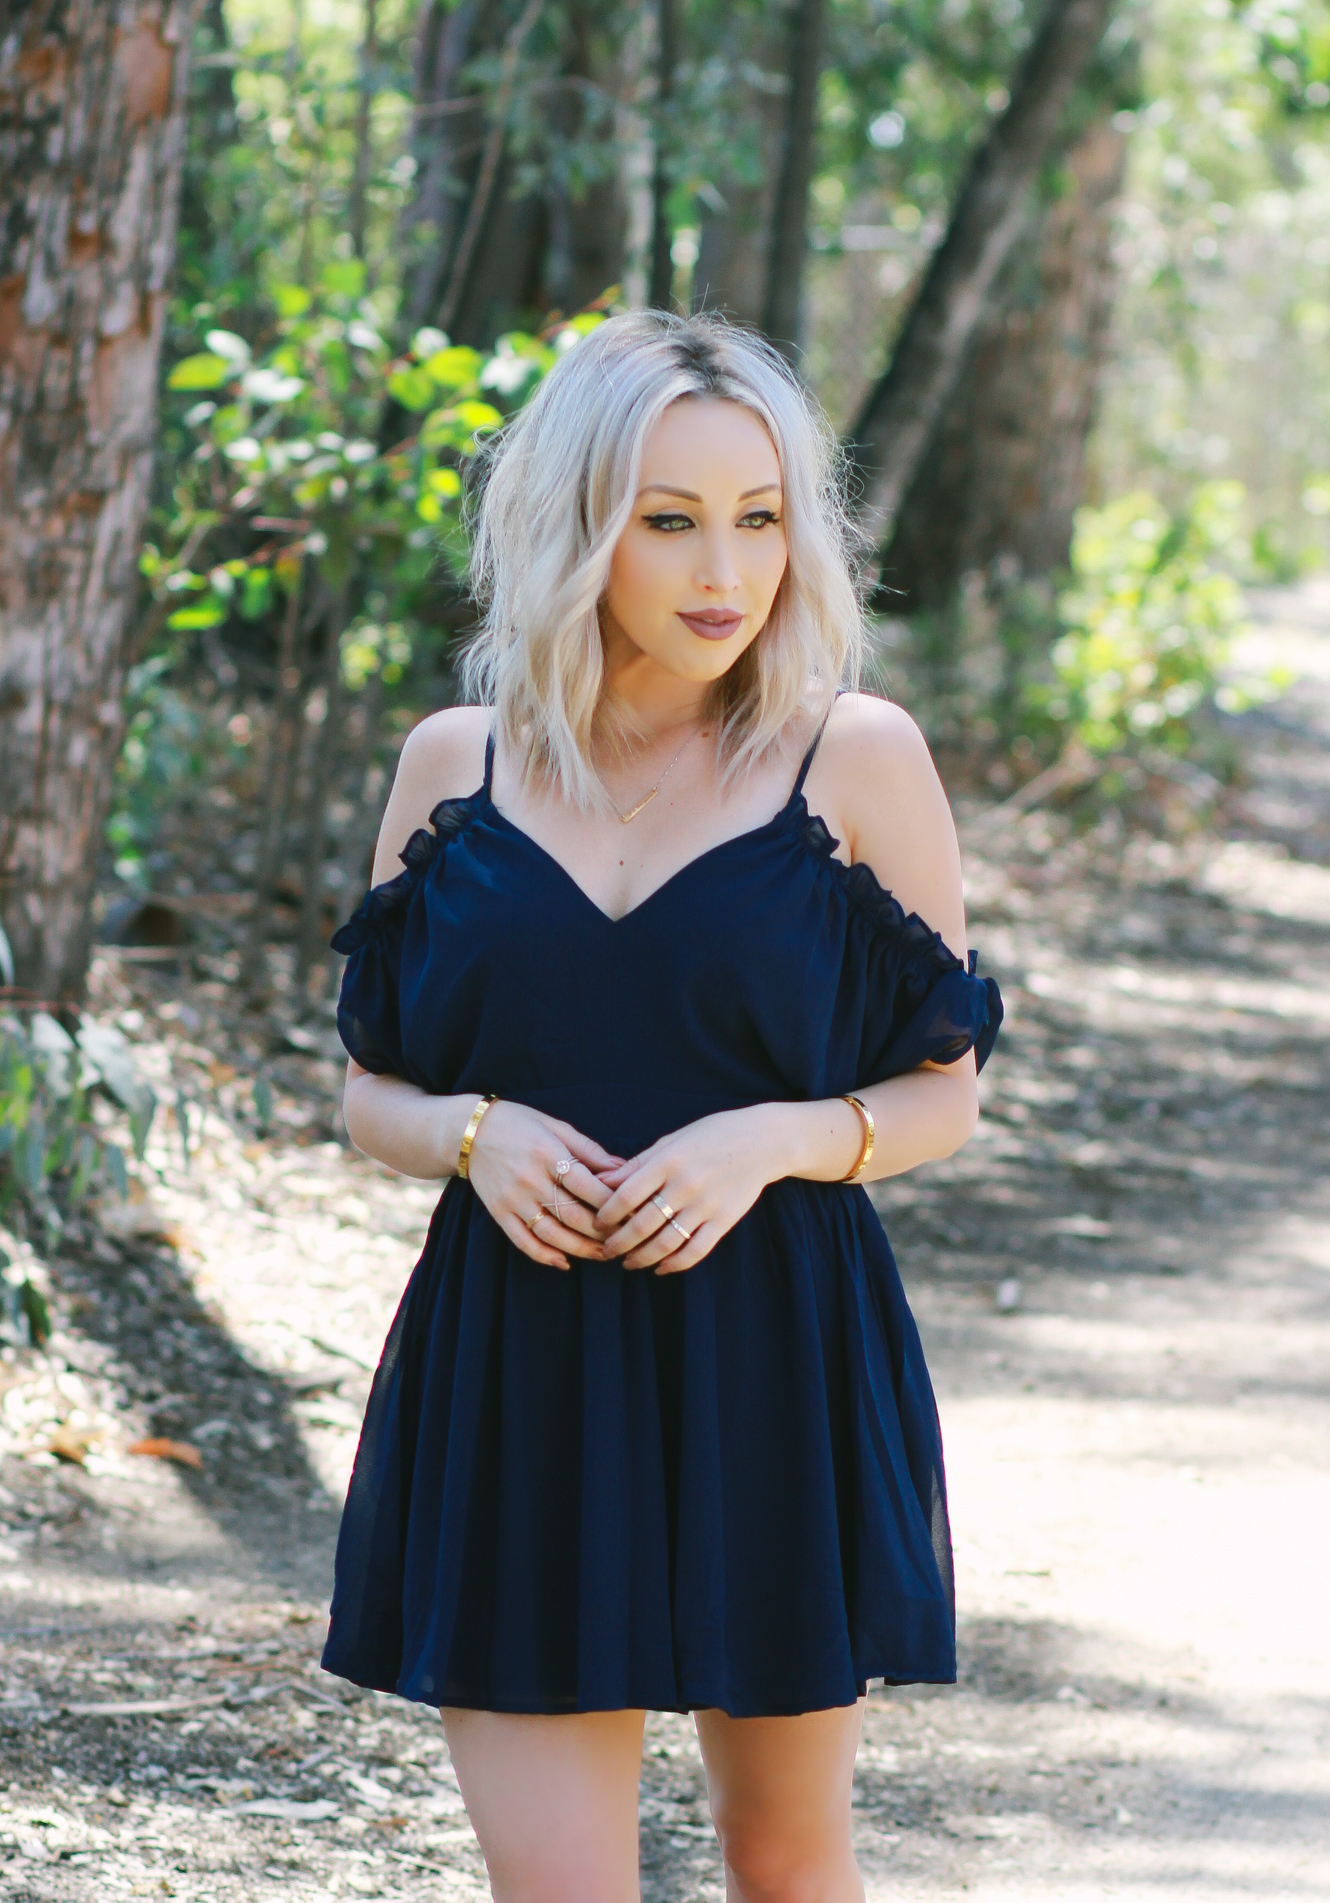 Blondie in the City | 4 Flowy Dresses You Need This Summer